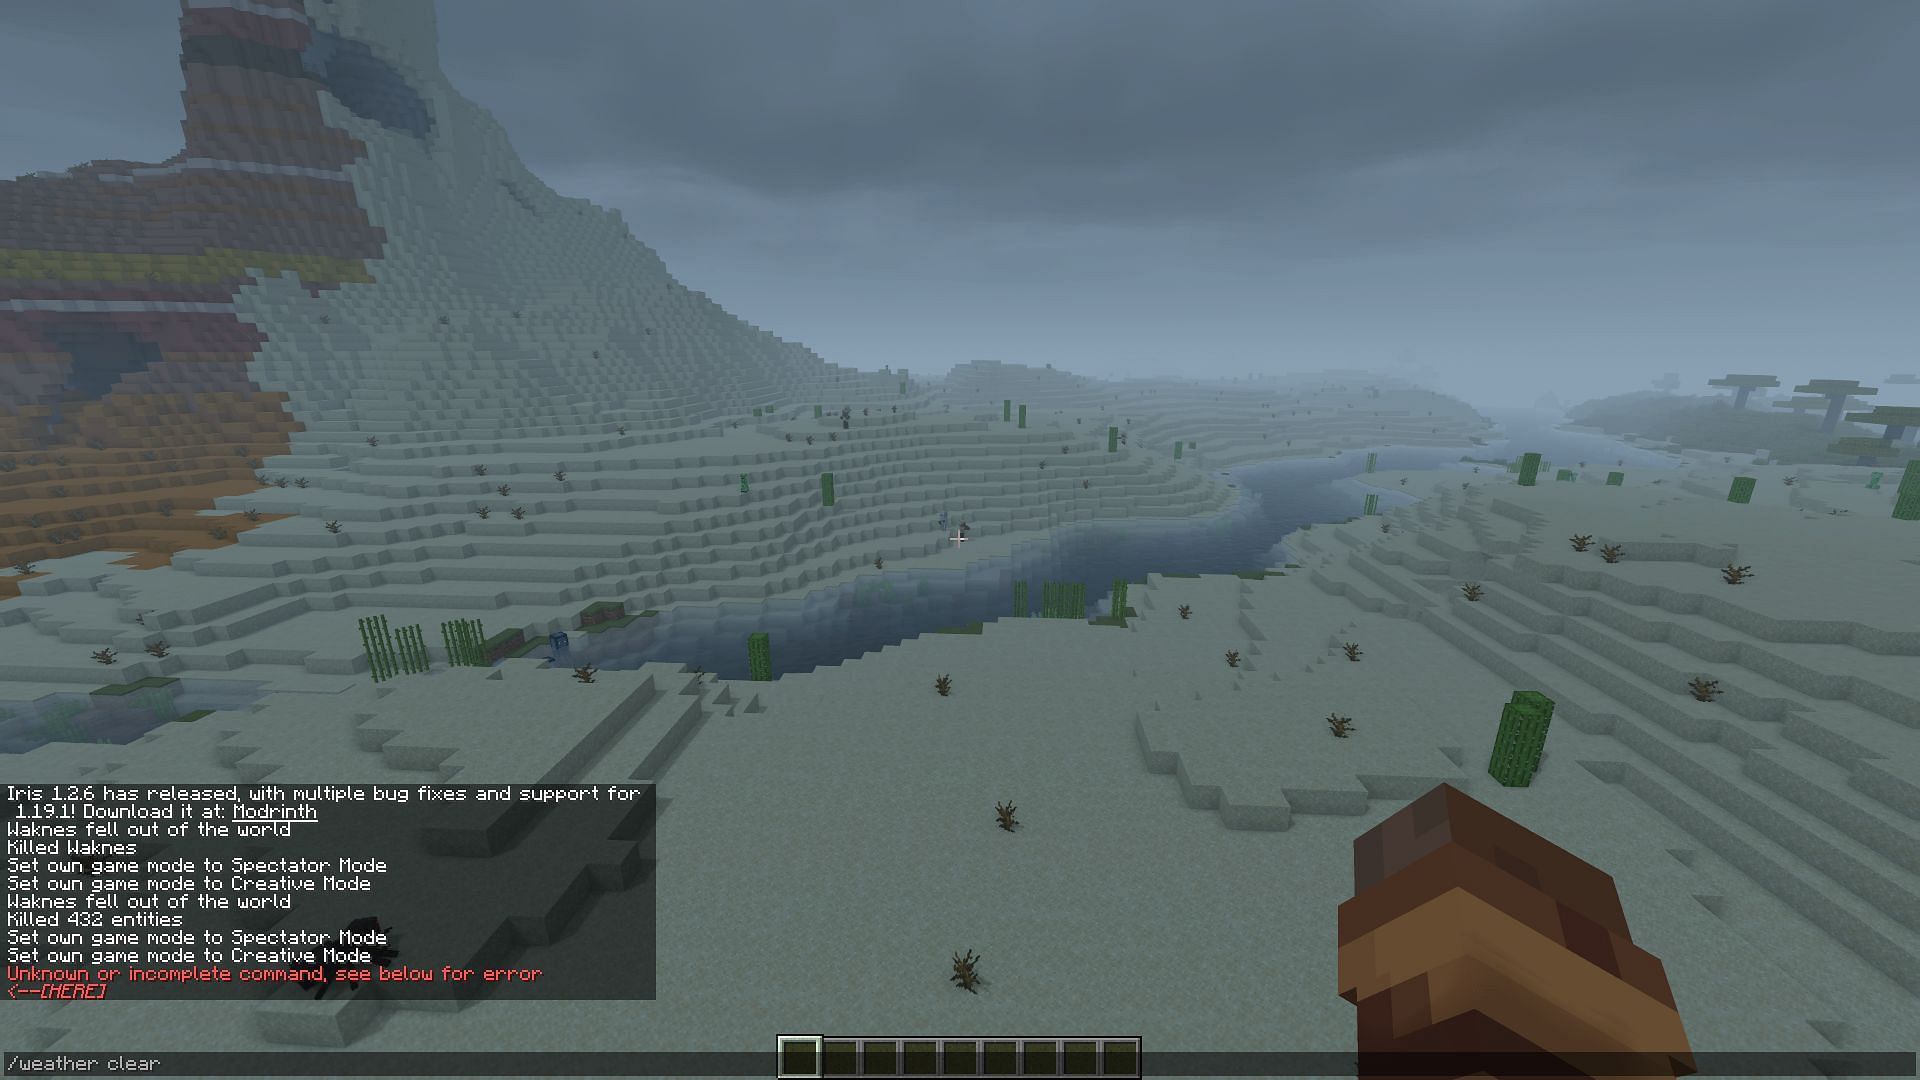 The /weather clear command being used to clear the overcast skies in a desert biome (Image via Minecraft)